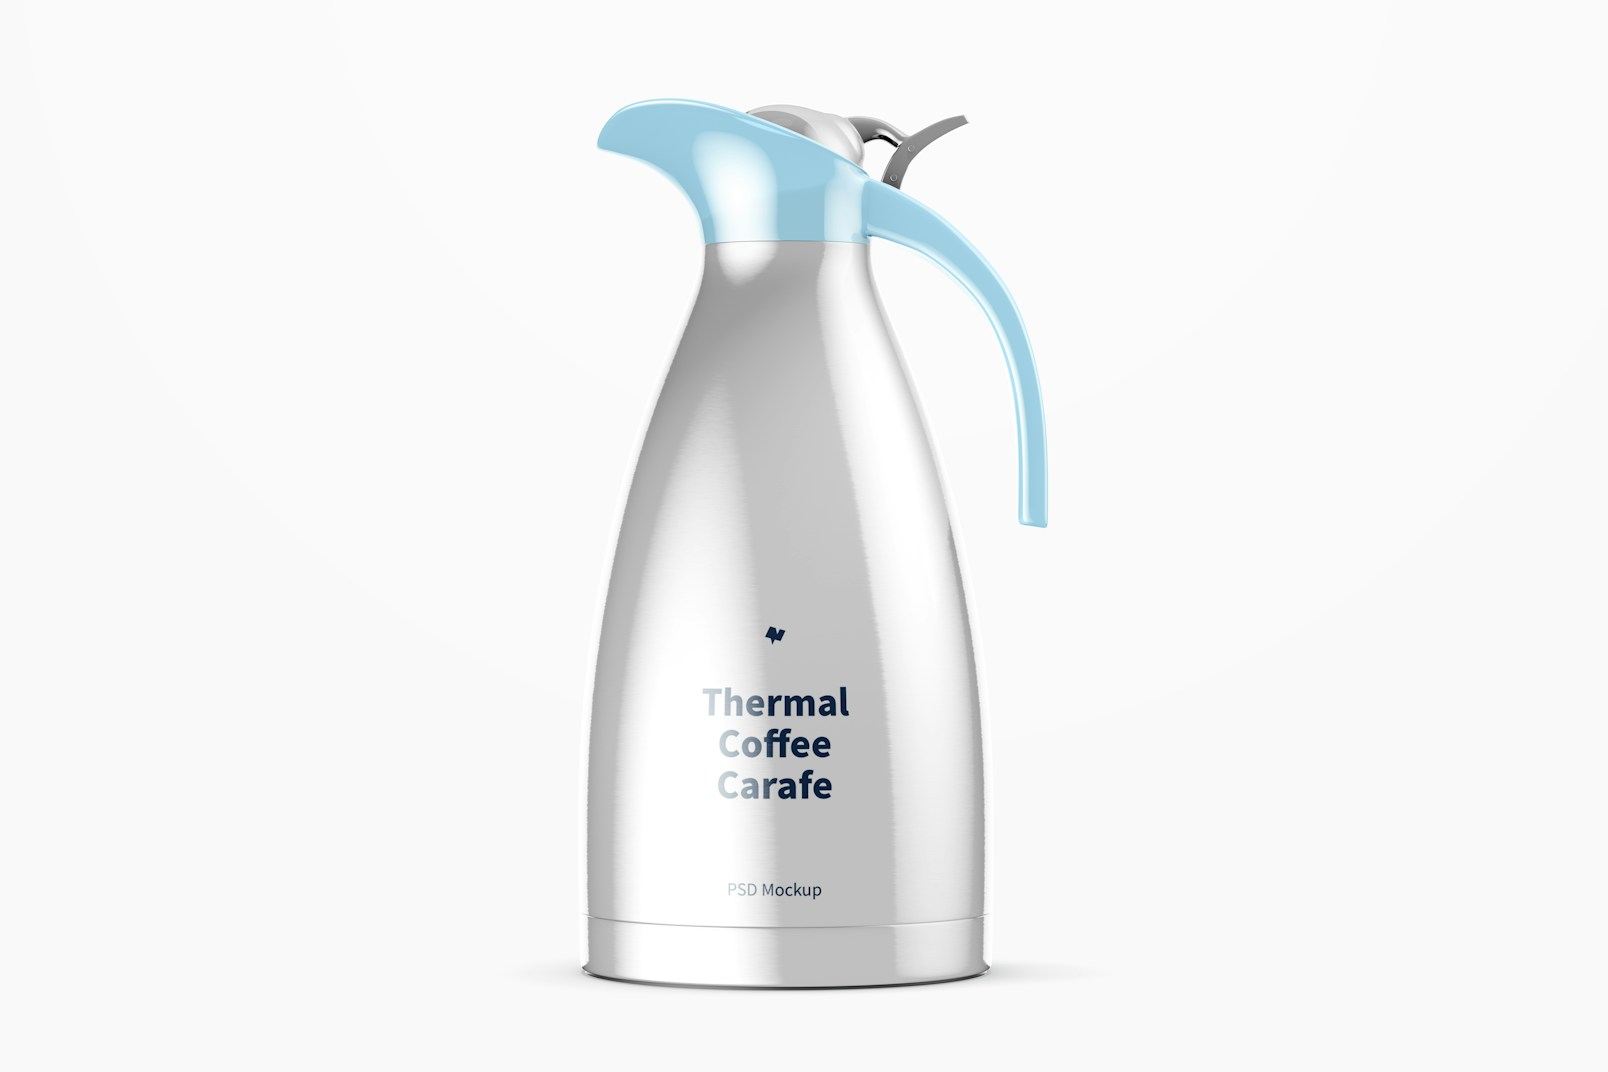 Thermal Coffee Carafe Mockup, Front View